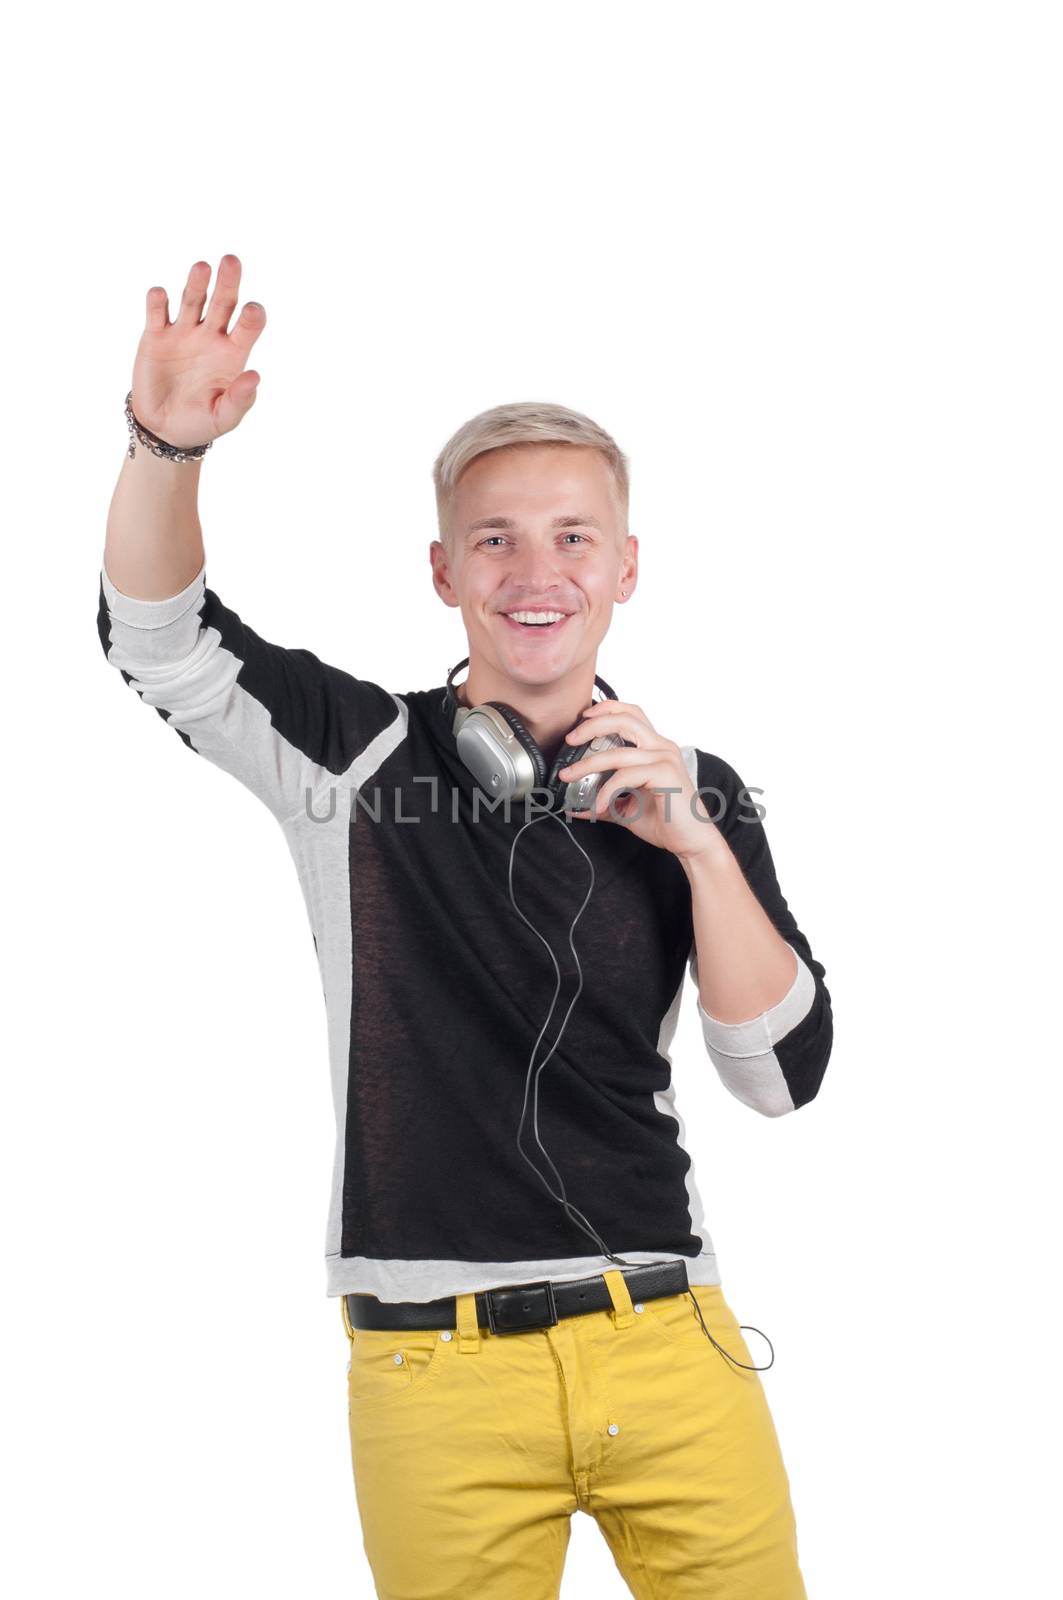 Man with headphones raising his hand up by anytka